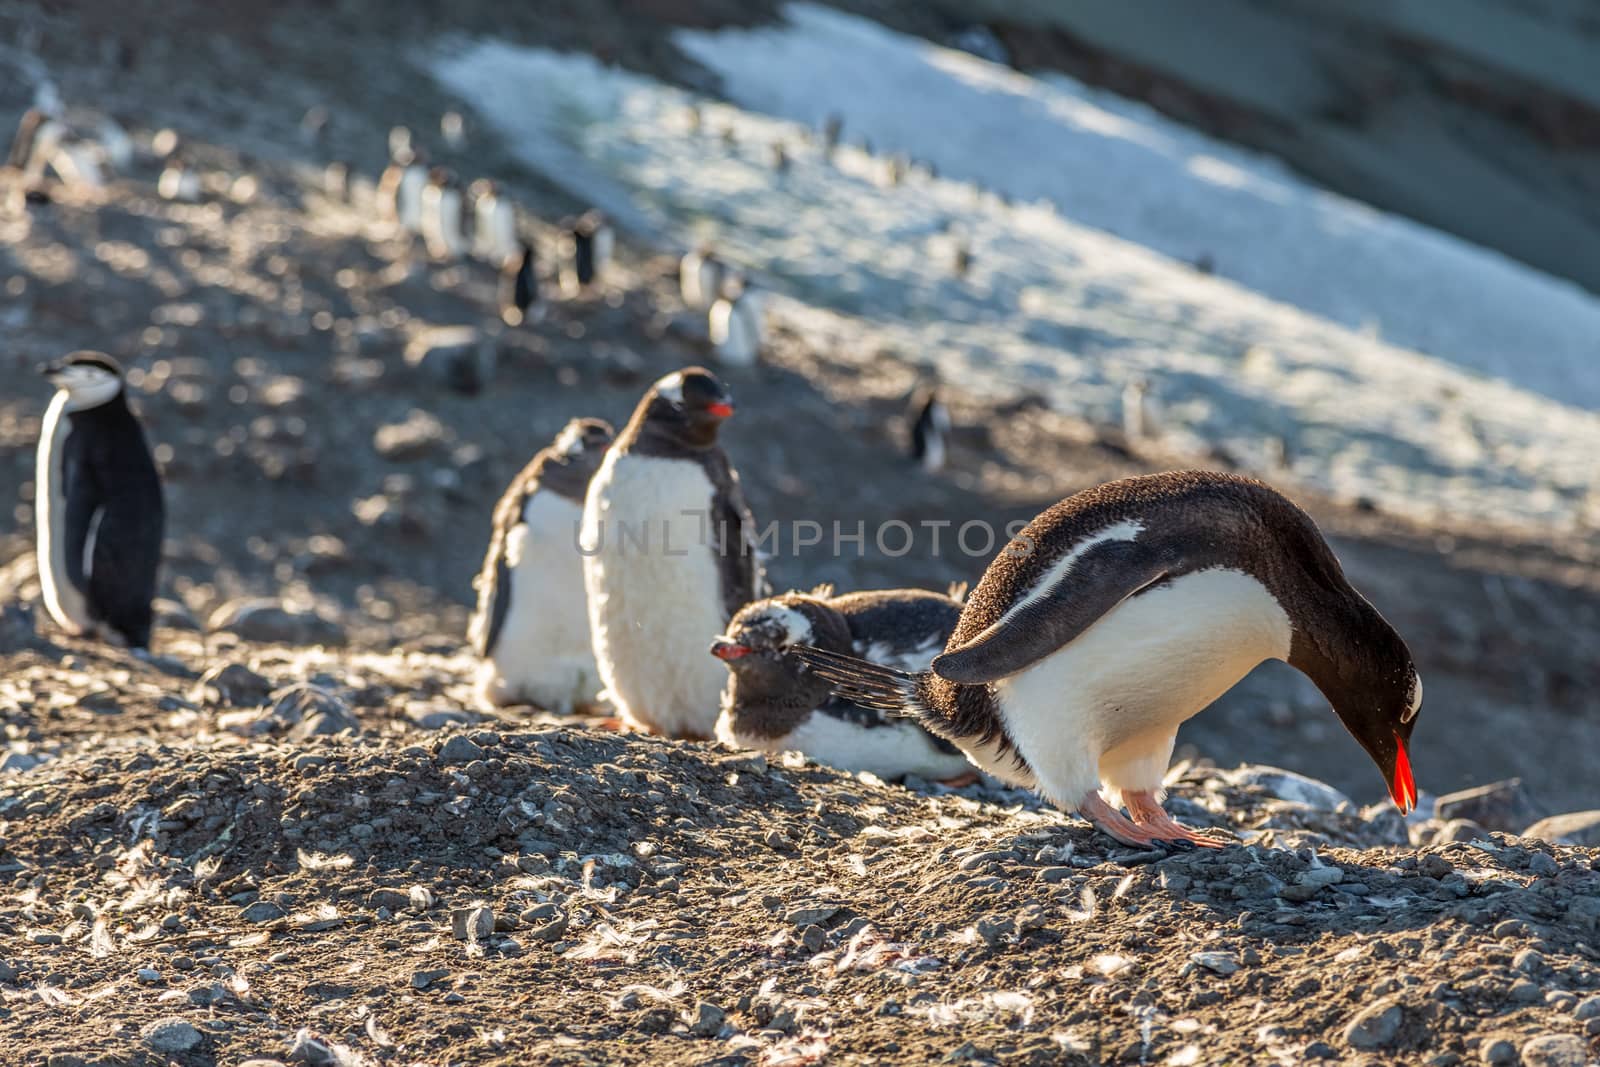 Several gentoo penguins chicks enjoing the sun at the Barrientos Island, Antarctic